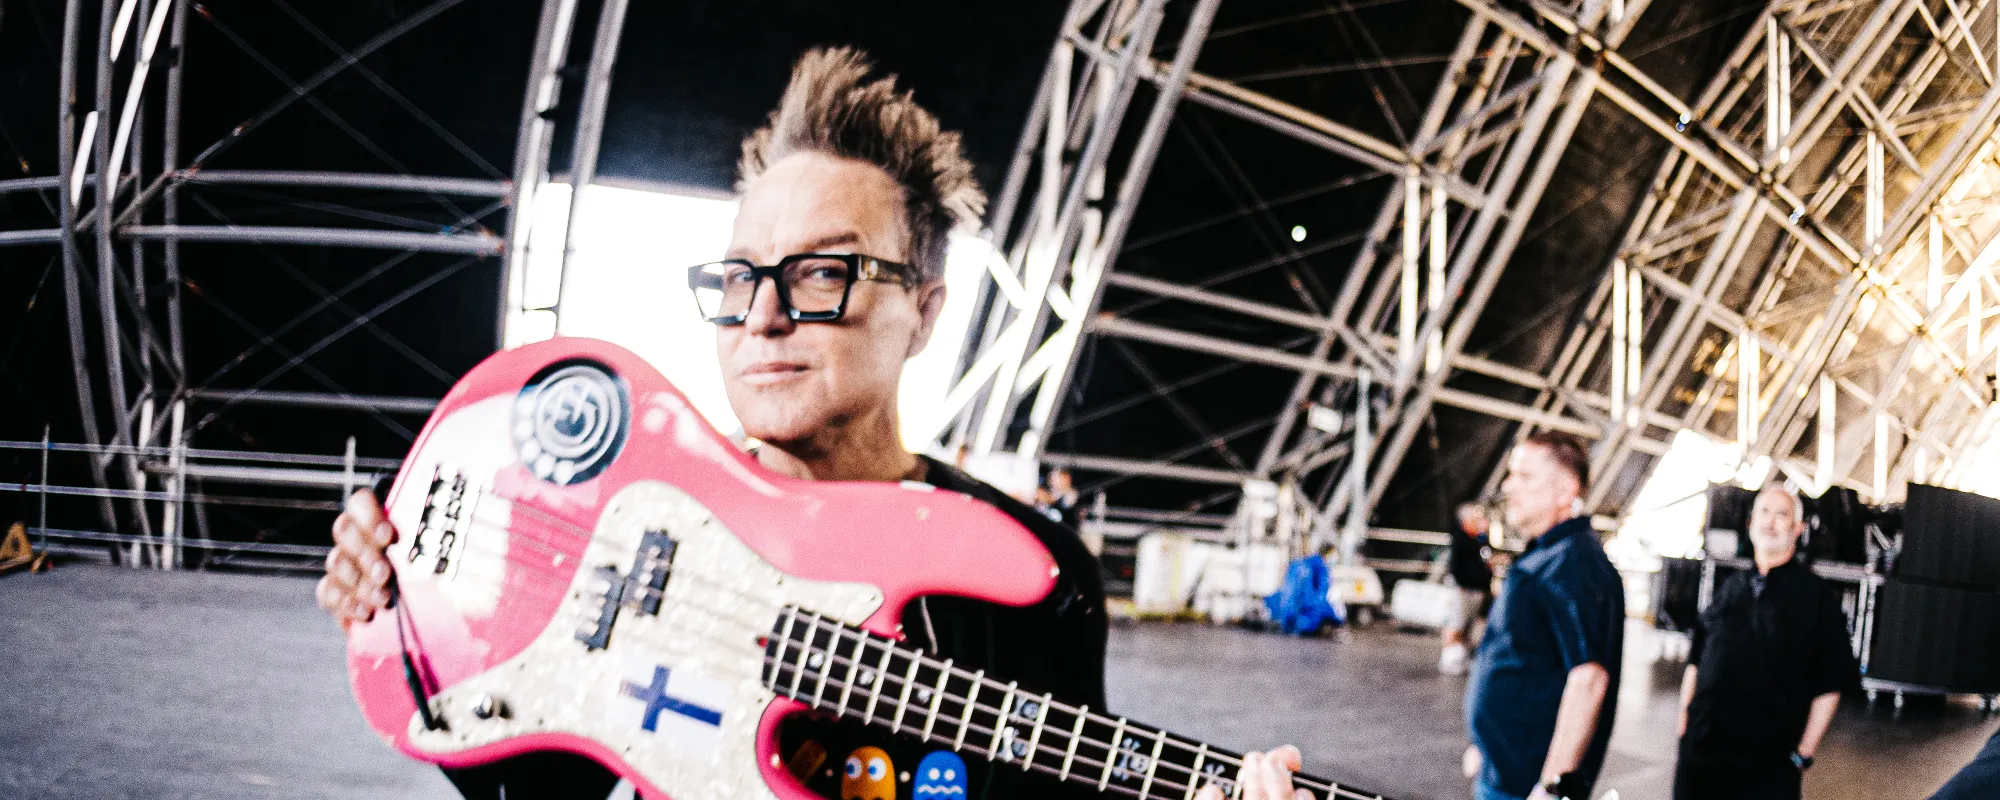 3 Songs You Didn’t Know Blink-182’s Mark Hoppus Wrote